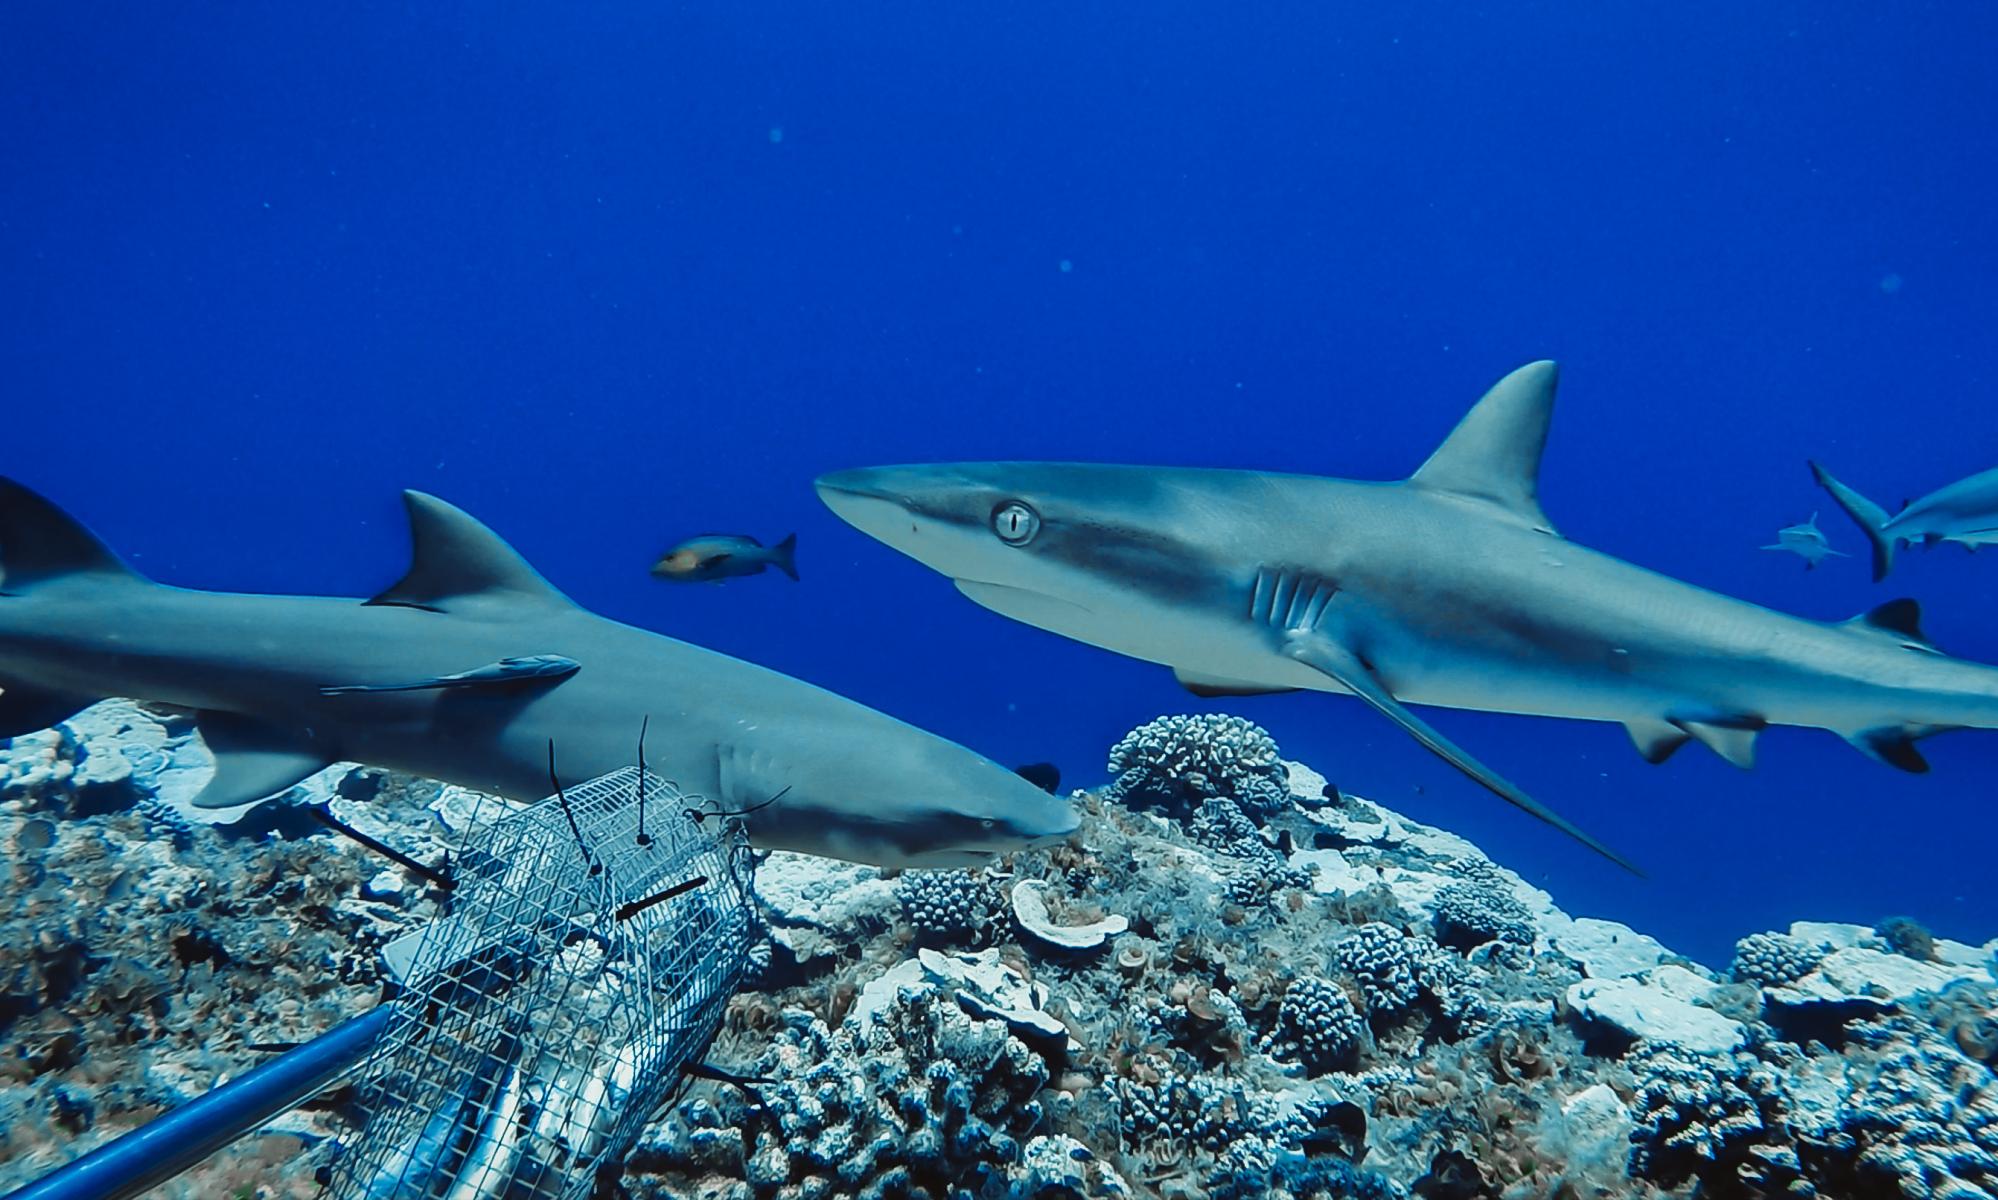 Sharks 'functionally extinct' at 20% of world's coral reefs as fishing drives global decline